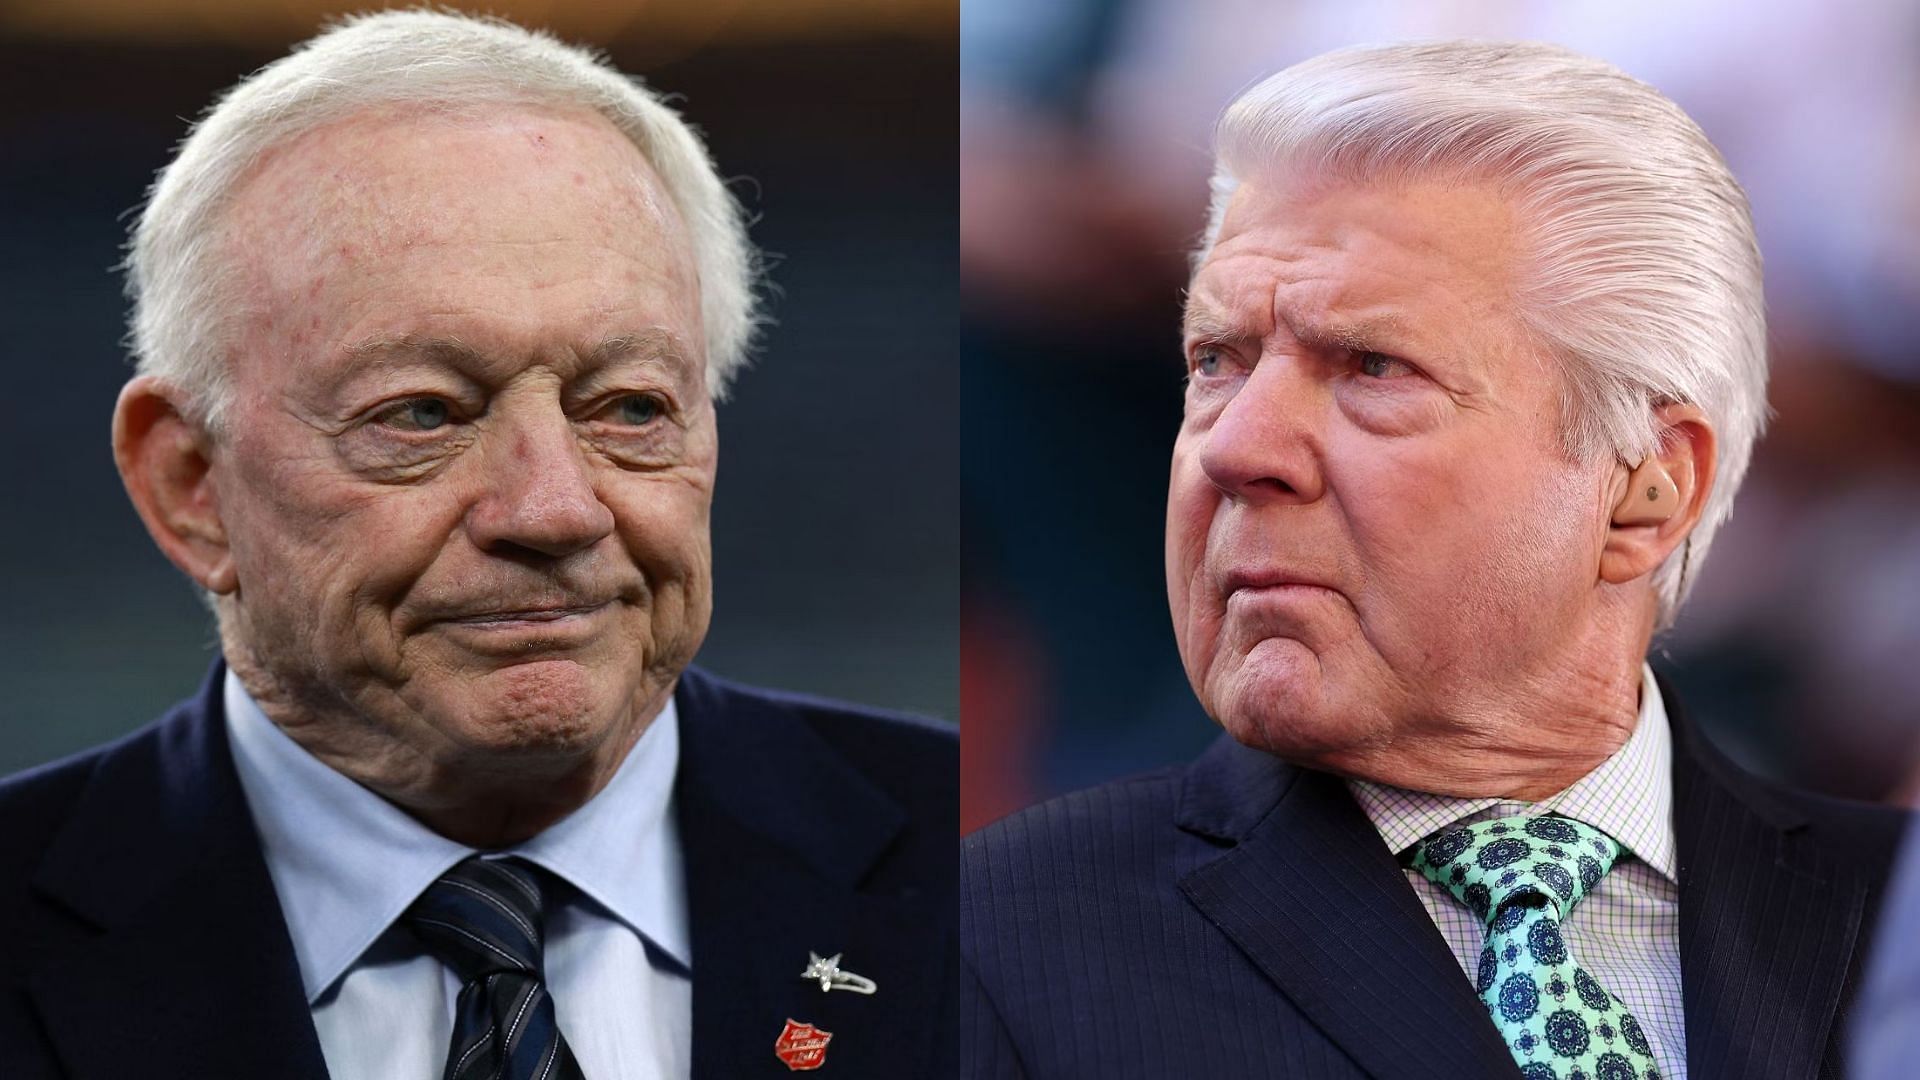 The successful yet contentious partnership between Dallas Cowboys head coach Jimmy Johnson and owner Jerry Jones lasted from 1989 to 1994.